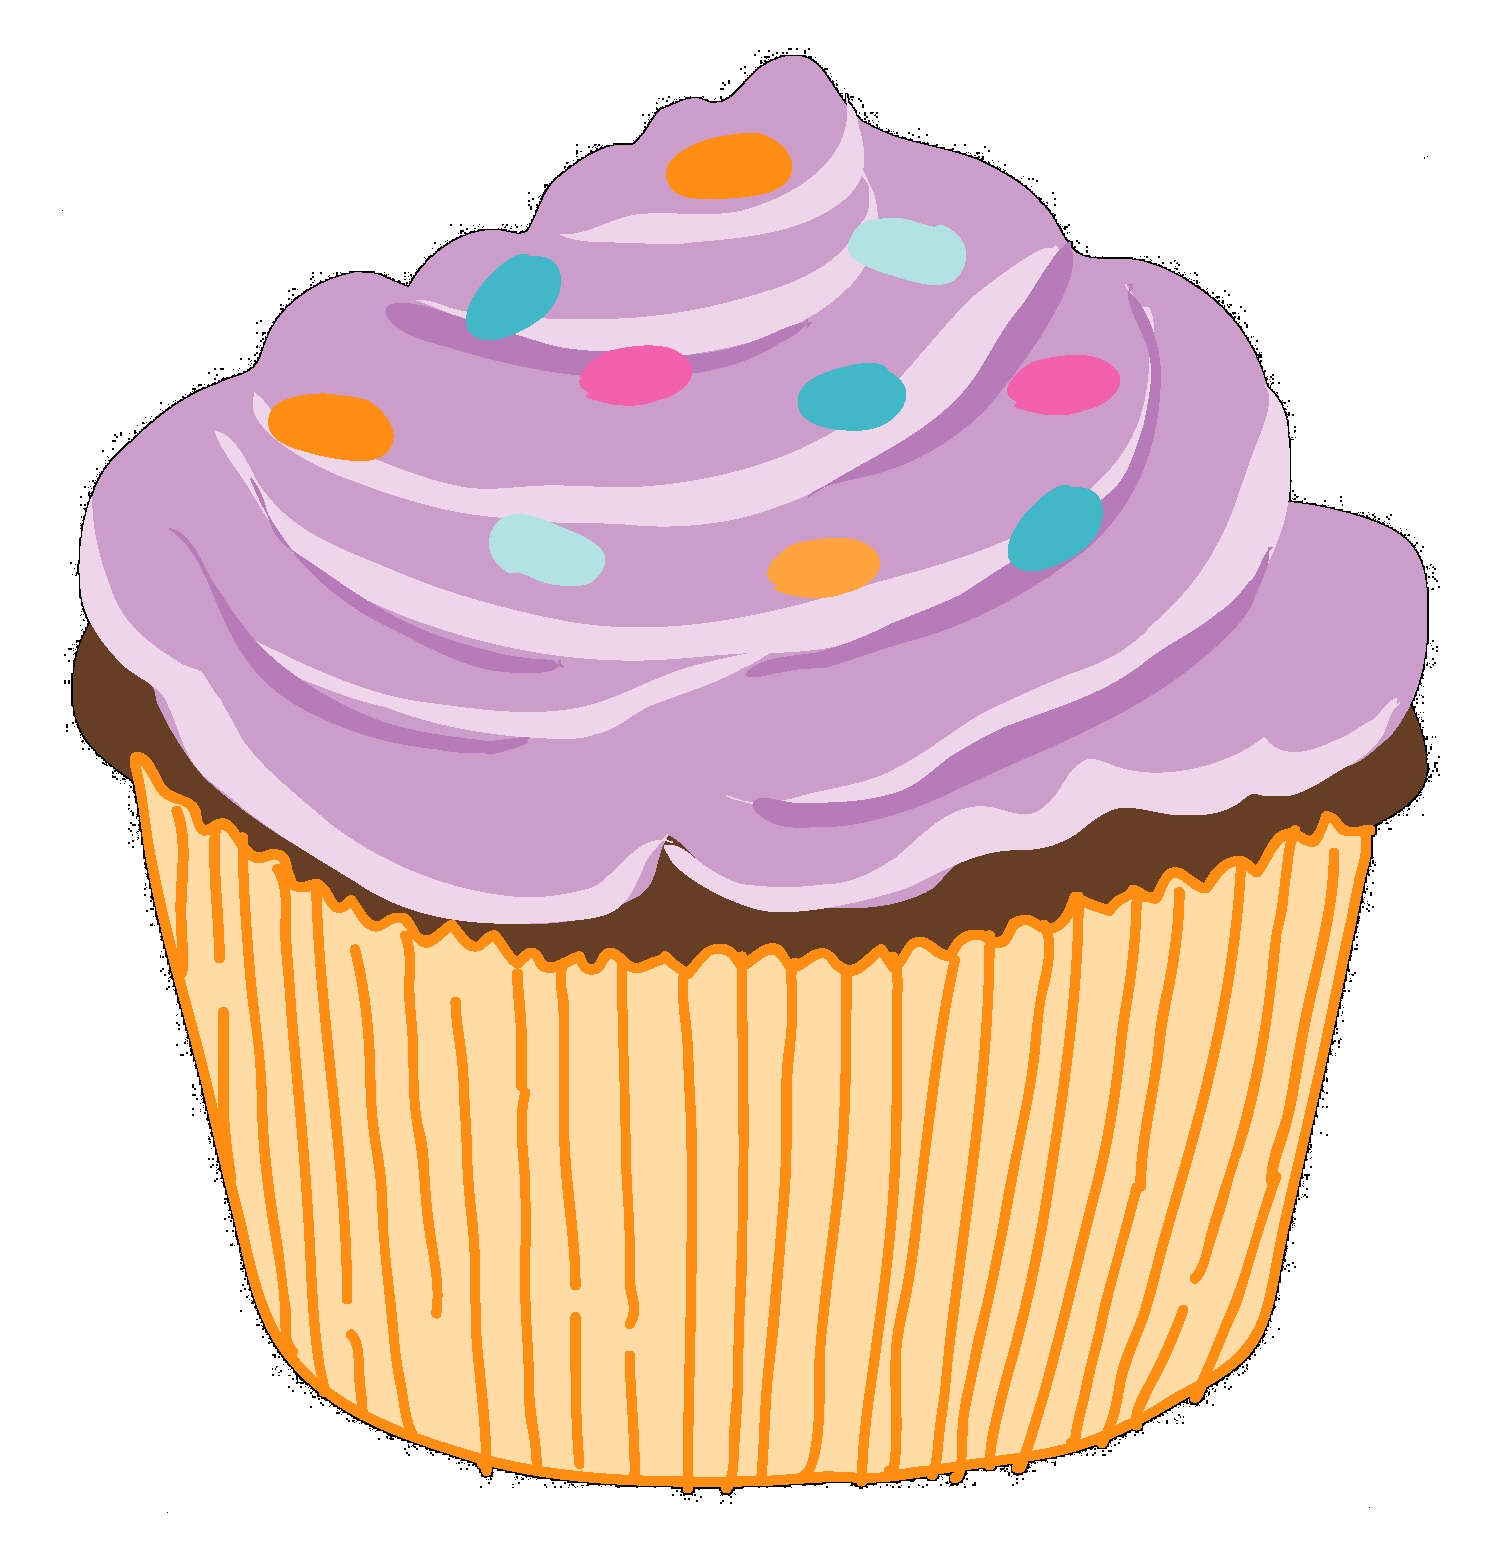 Cupcake Clip Art Silhouette - Free Clipart Images